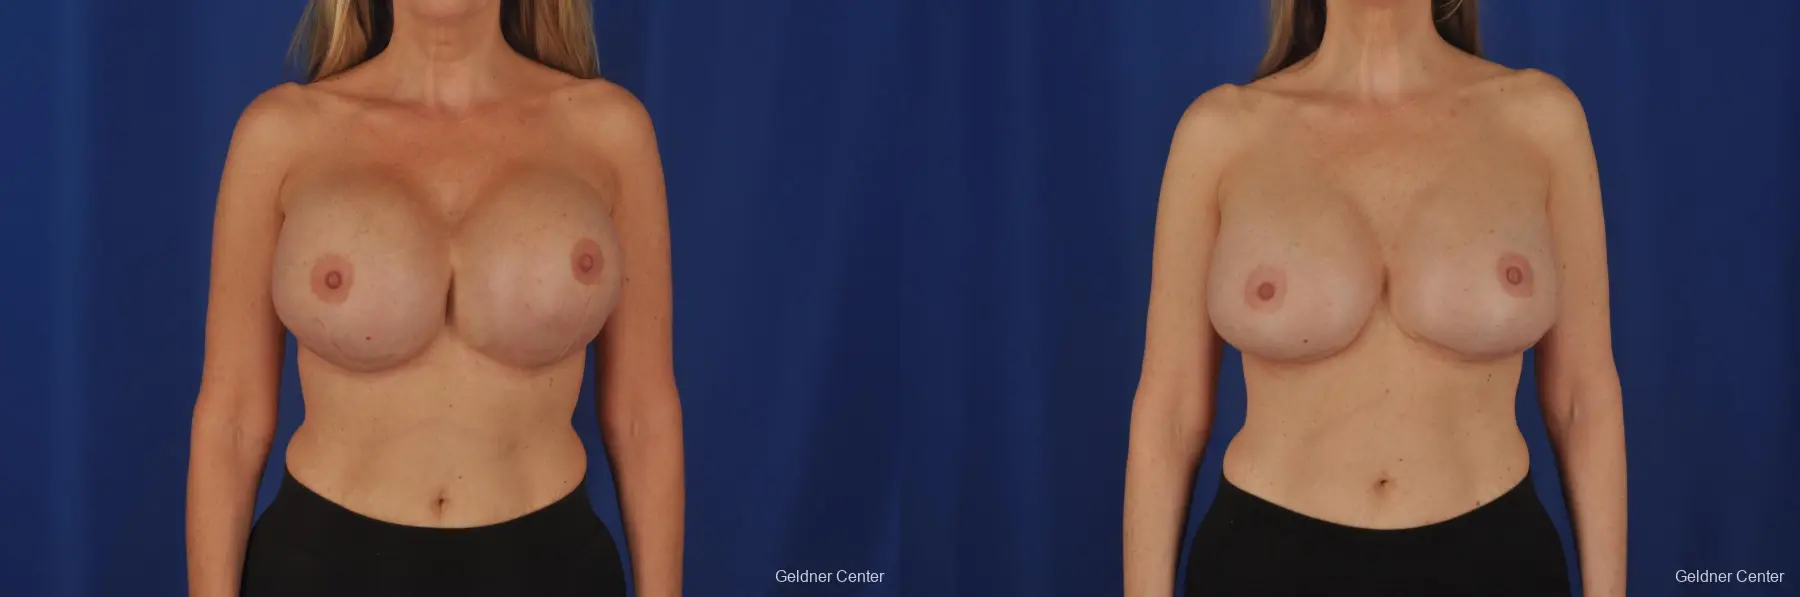 Complex Breast Augmentation Lake Shore Dr, Chicago 2389 - Before and After 1